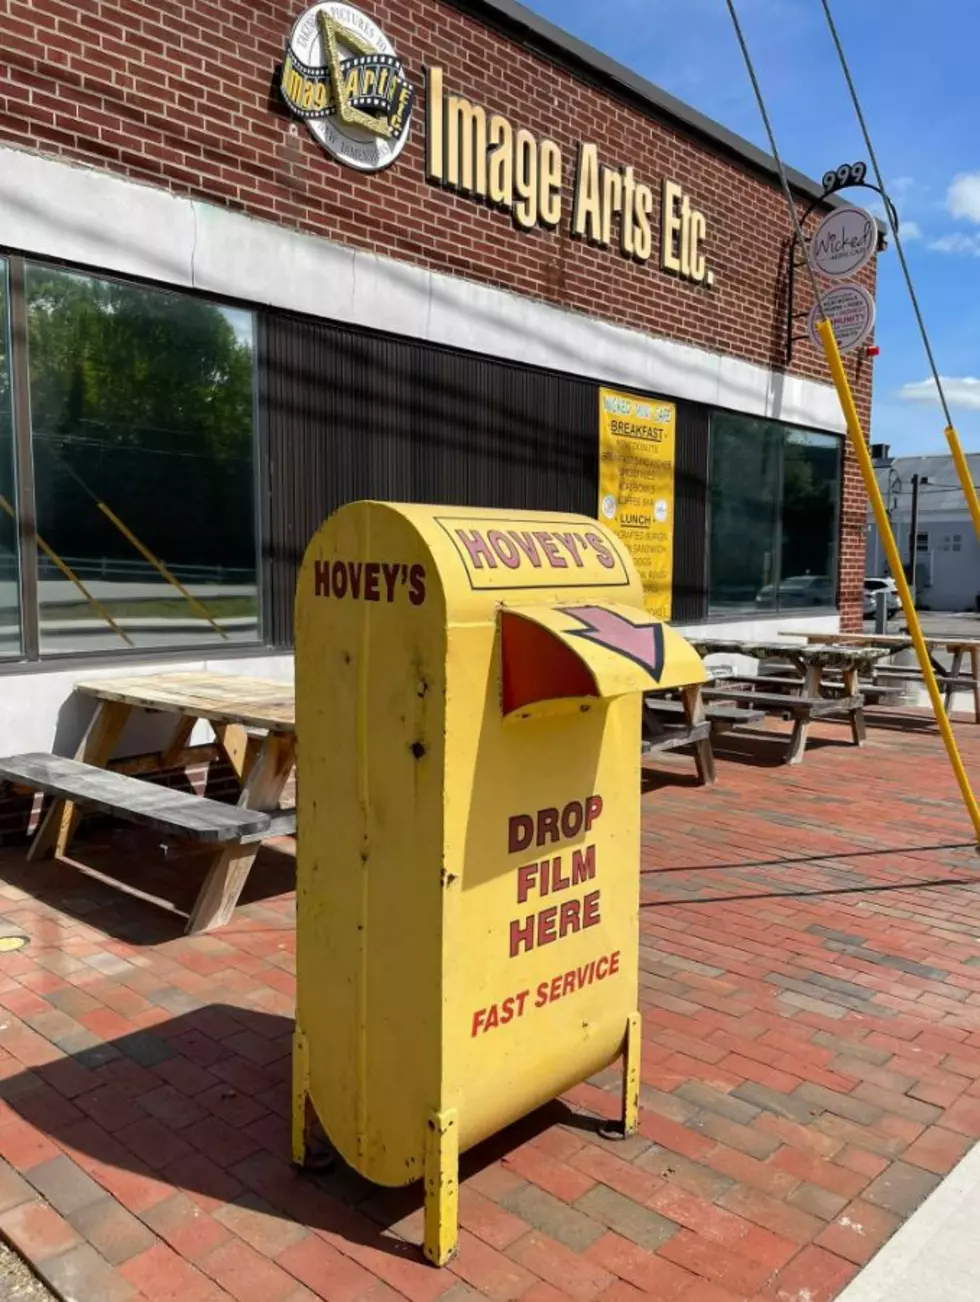 Portsmouth, New Hampshire’s Stolen Film Drop Box Mysteriously Returned After 15 Years of Being Missing